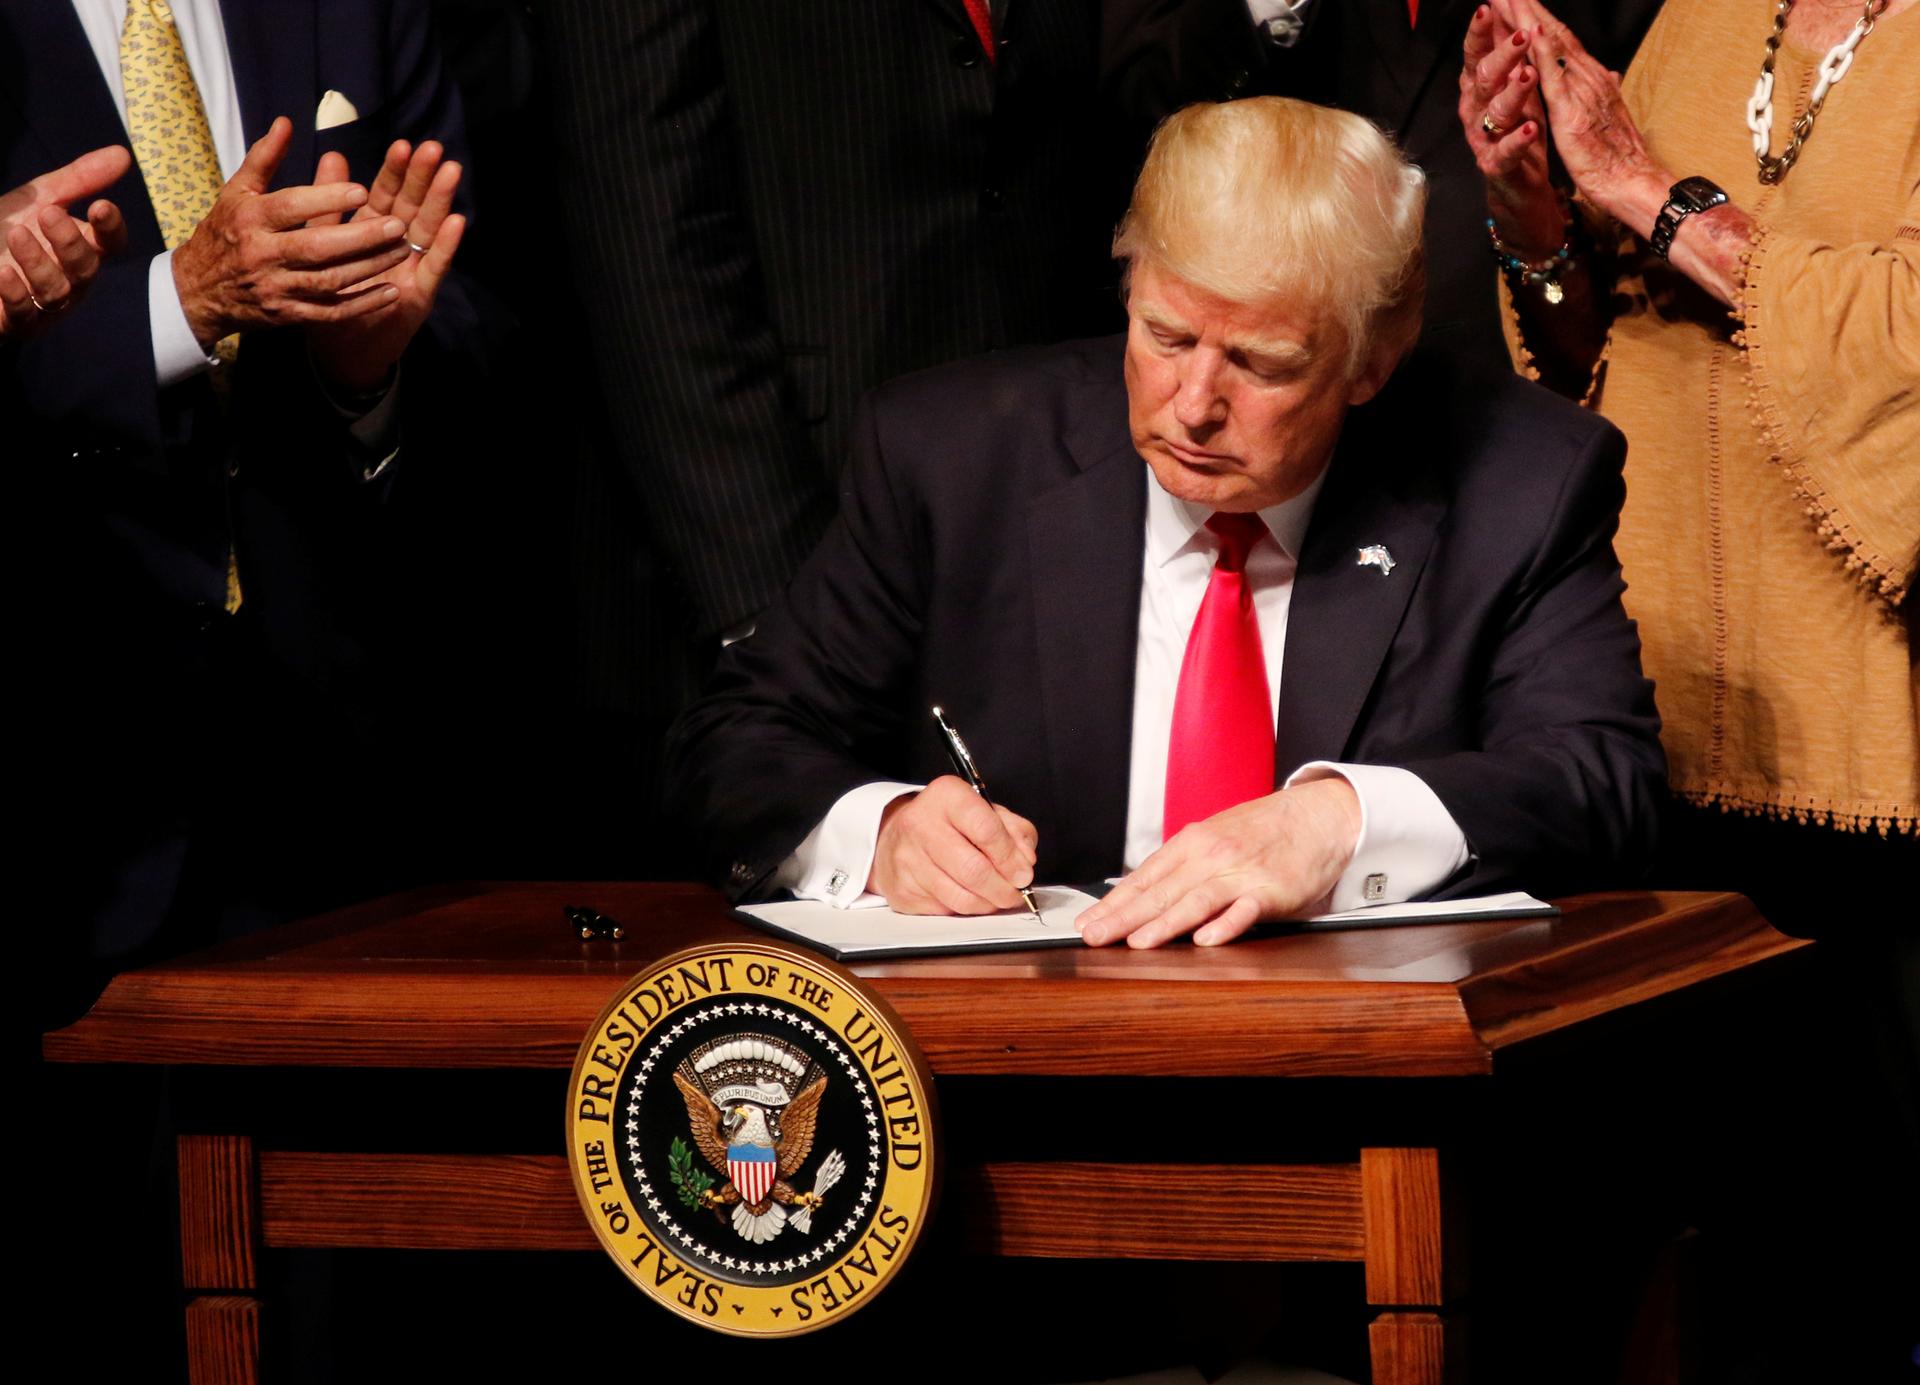 US President Donald Trump signs a document after announcing his Cuba policy